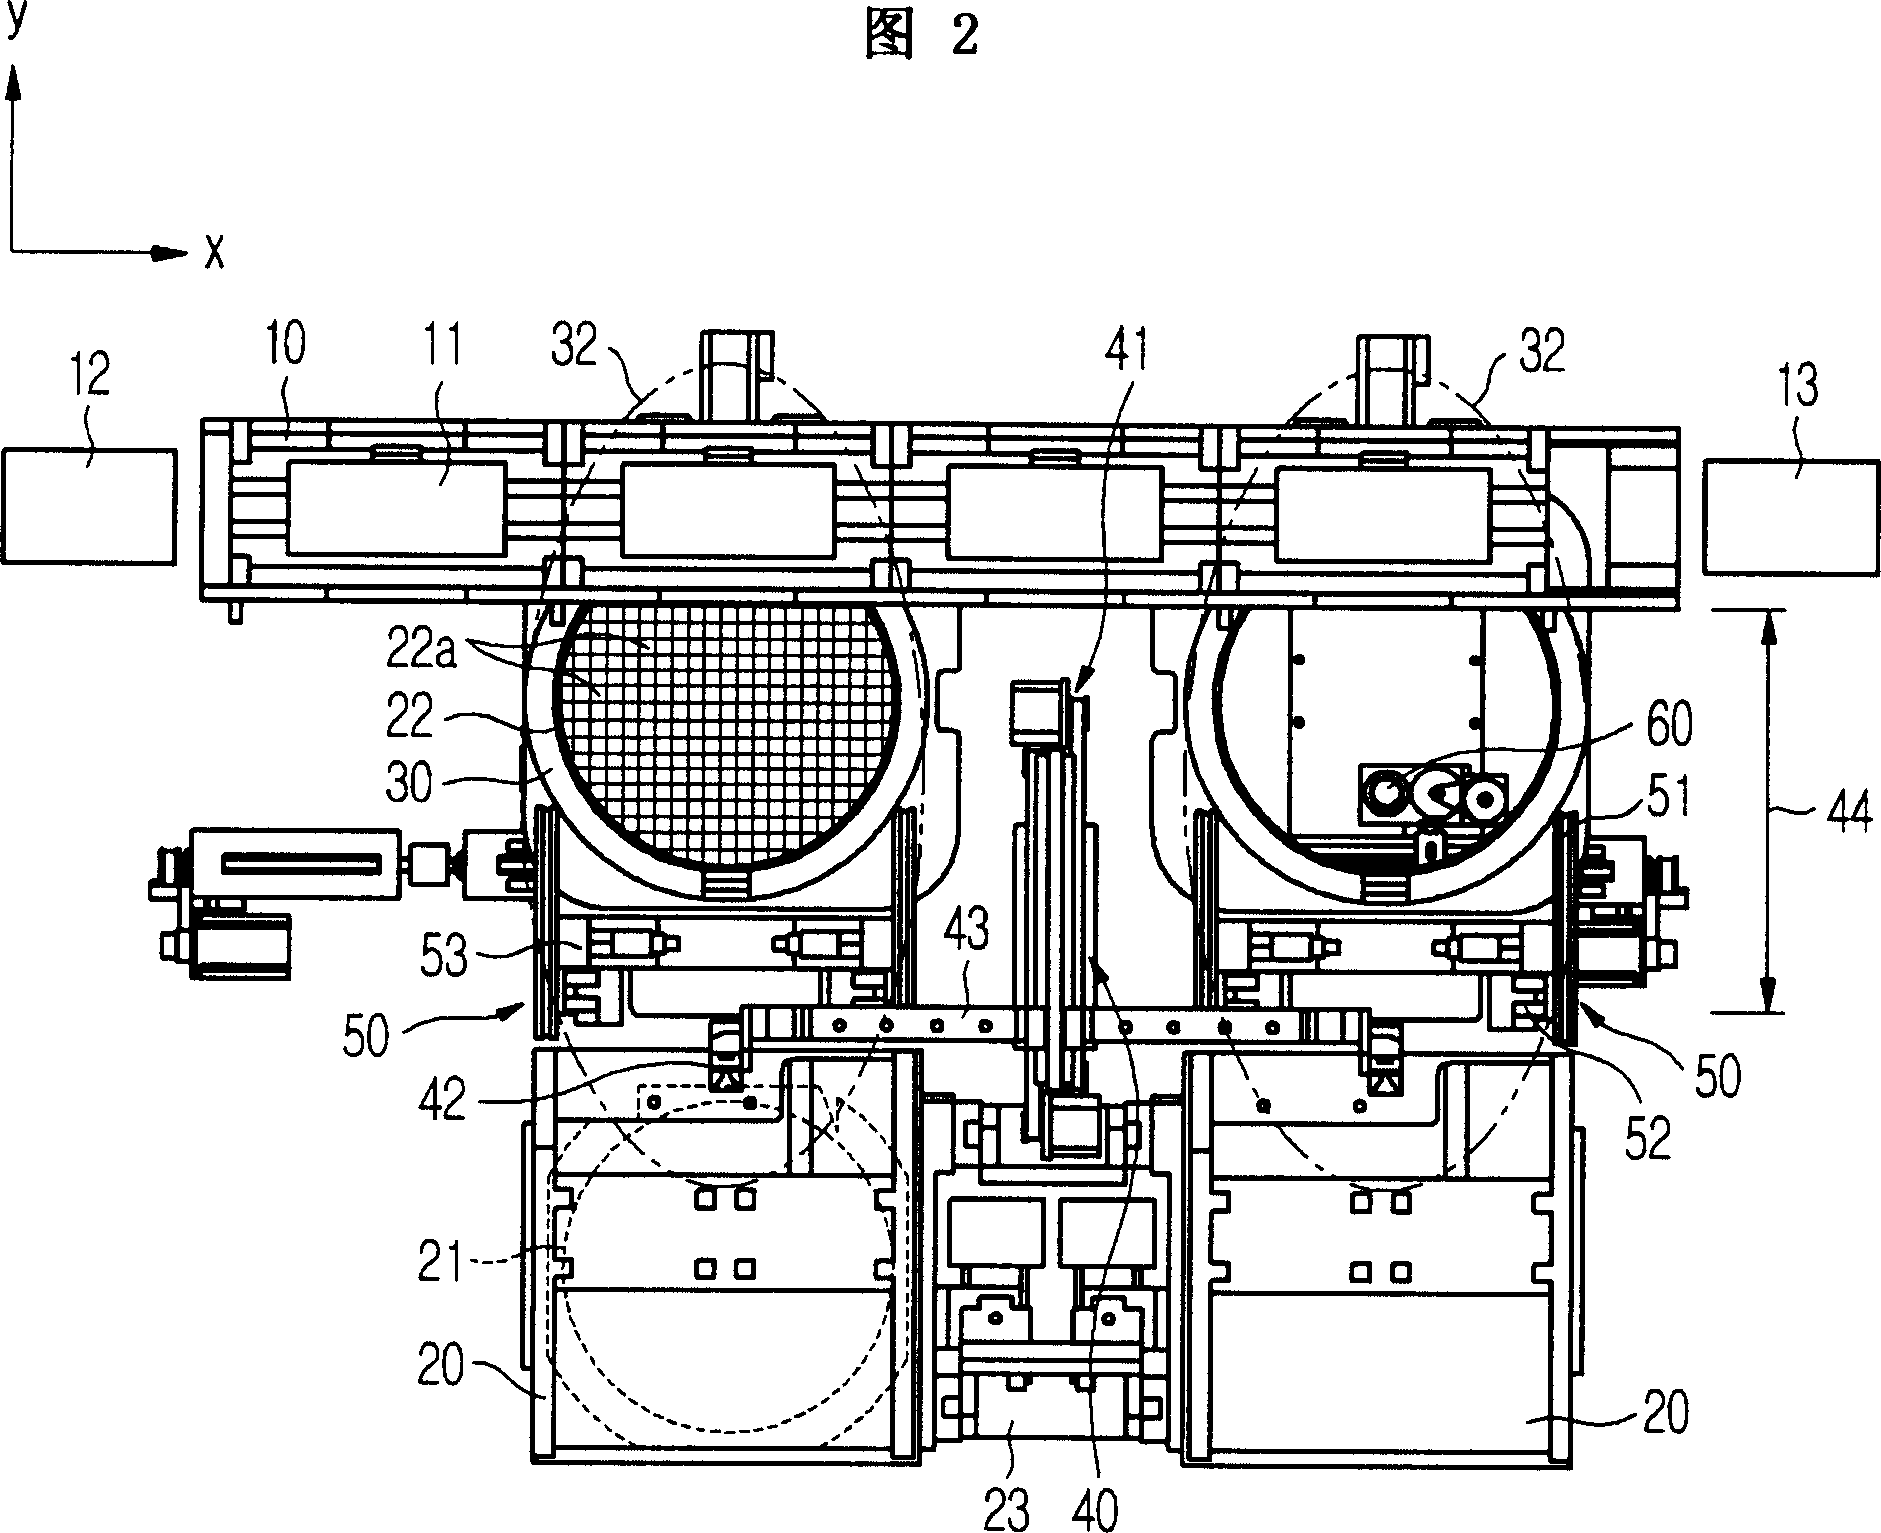 Chip welding device and method using same